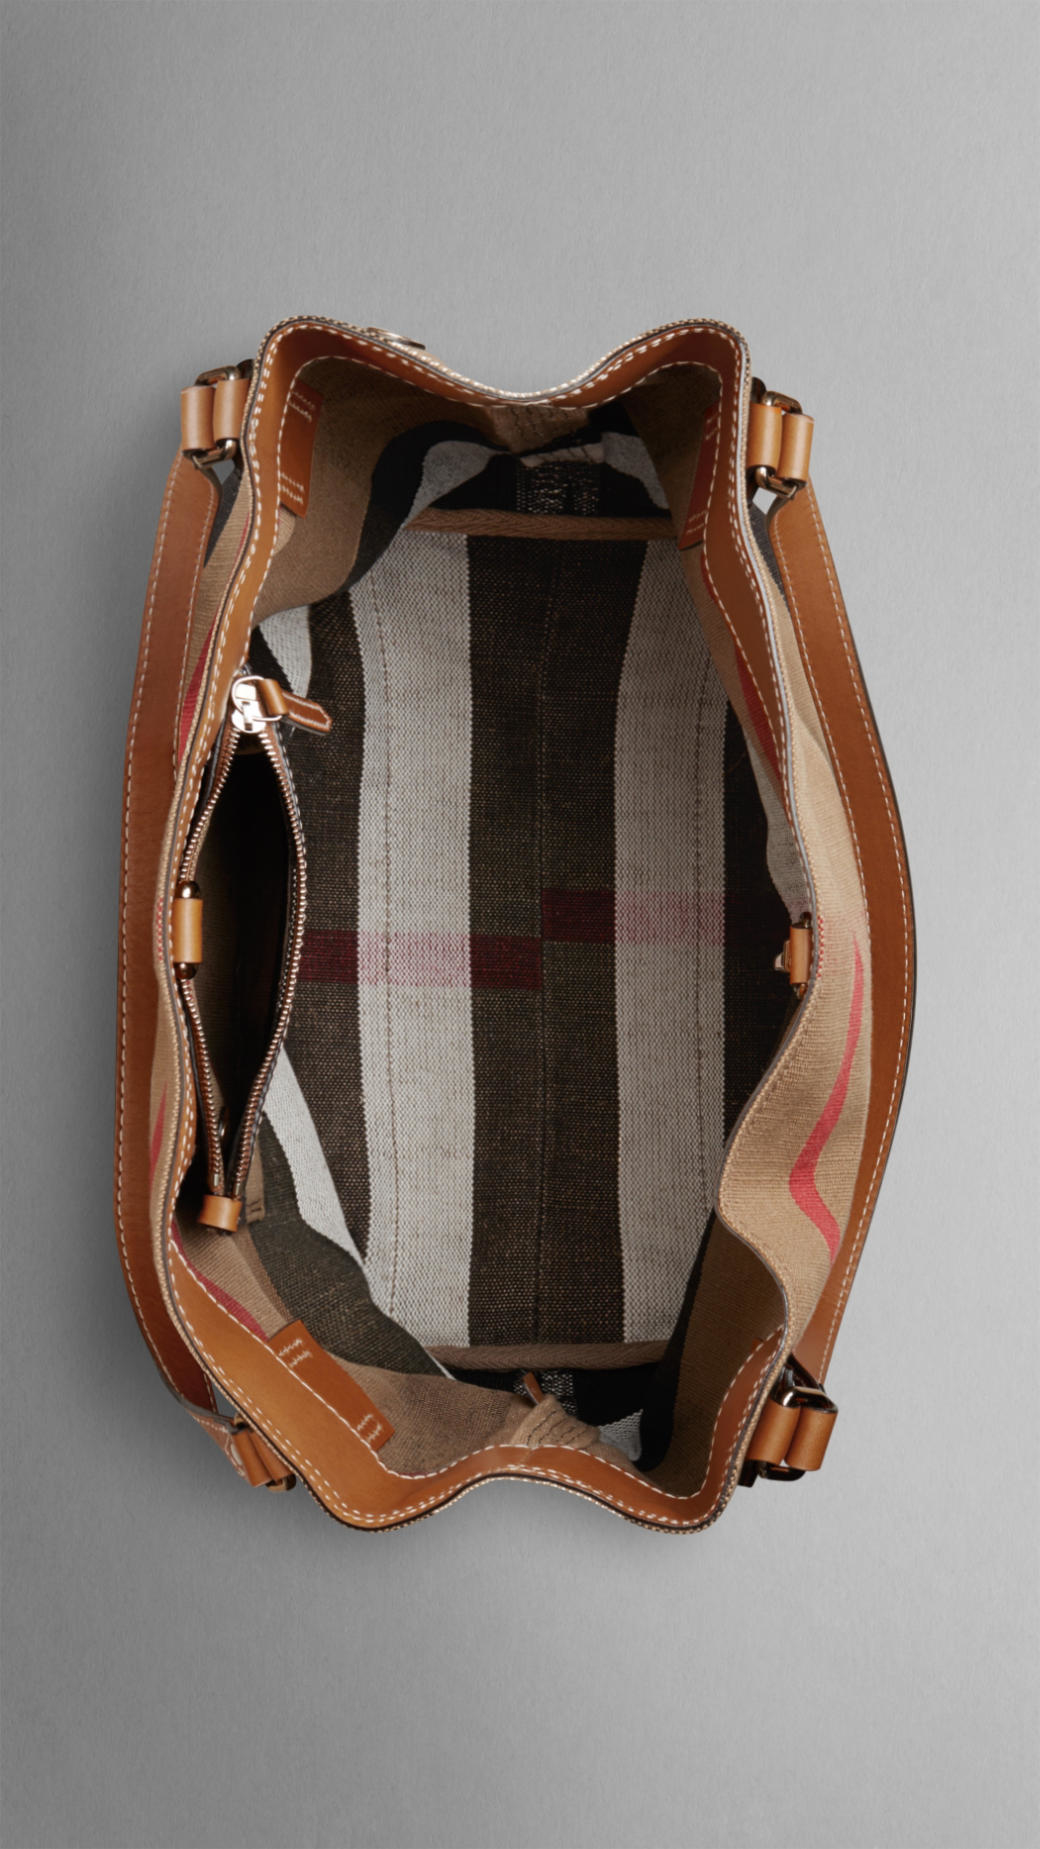 Burberry Medium Canvas Check Tote Bag in Brown - Lyst